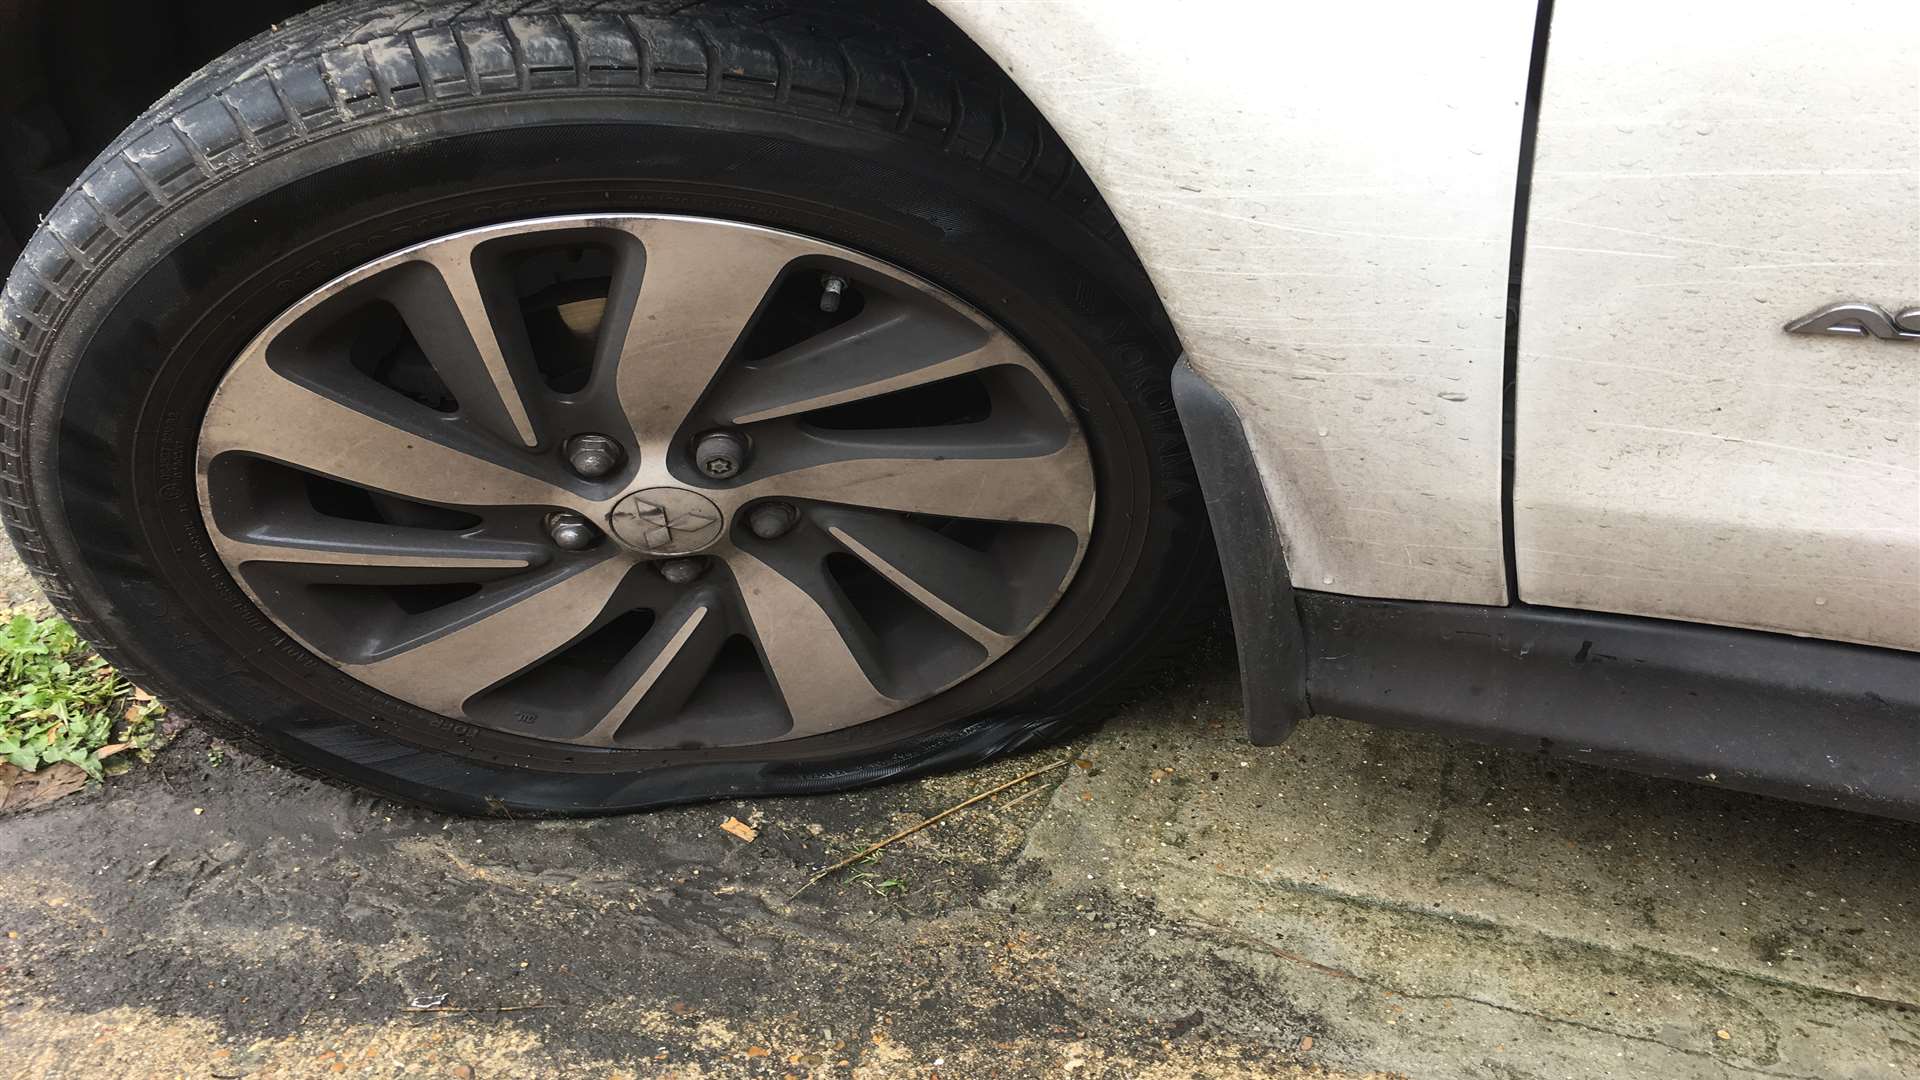 Cars have had their tyres slashed